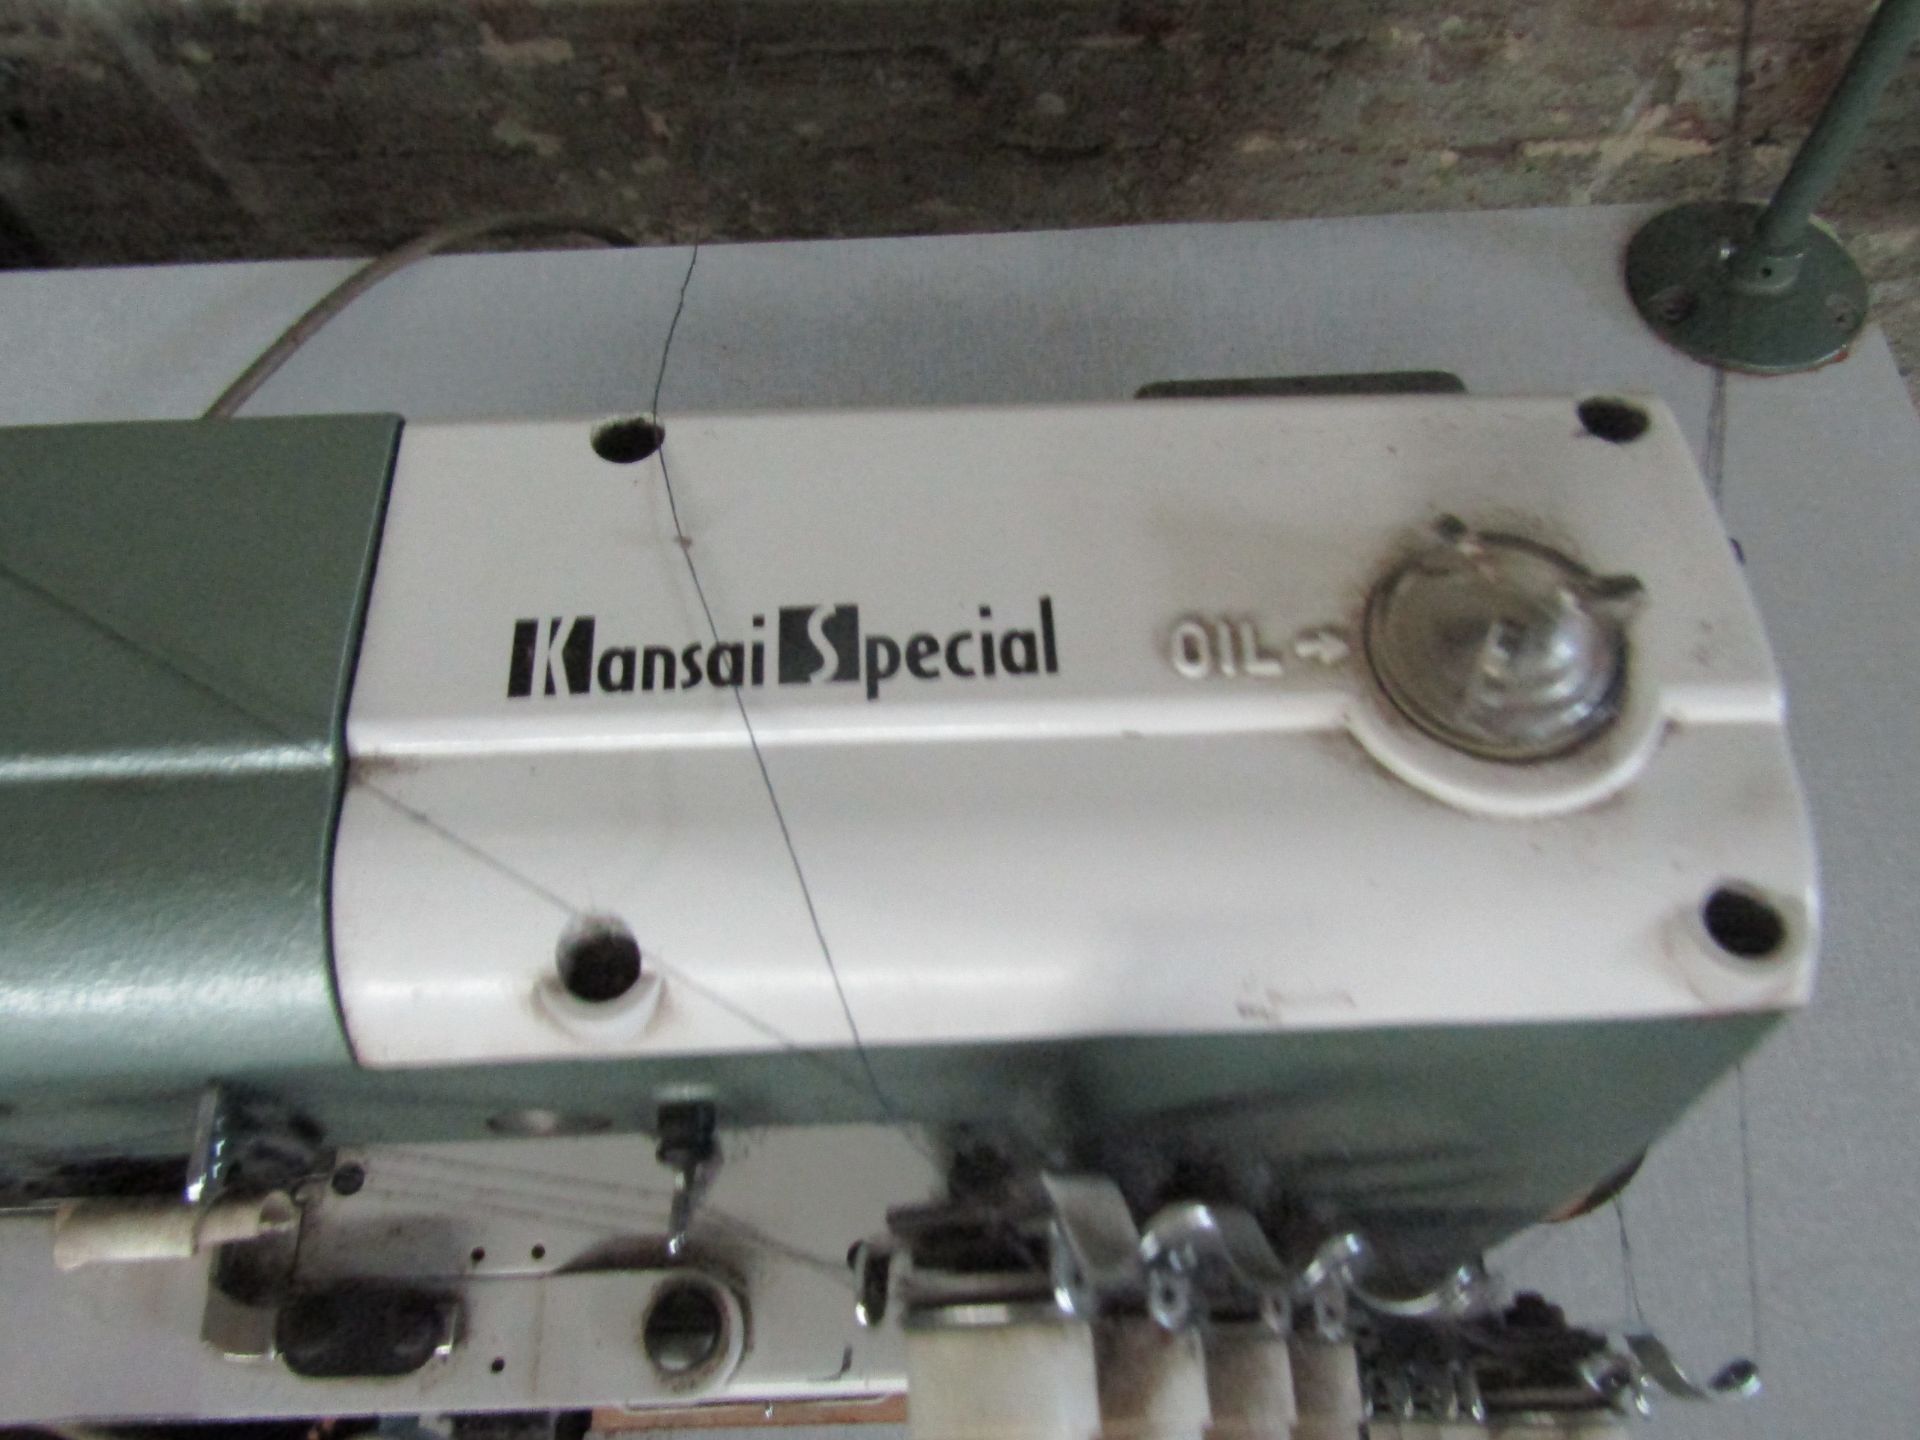 Kansai special DFB1404PMD Multi needle double chain stitch machine, table ,mounted with peddles, was - Image 4 of 6